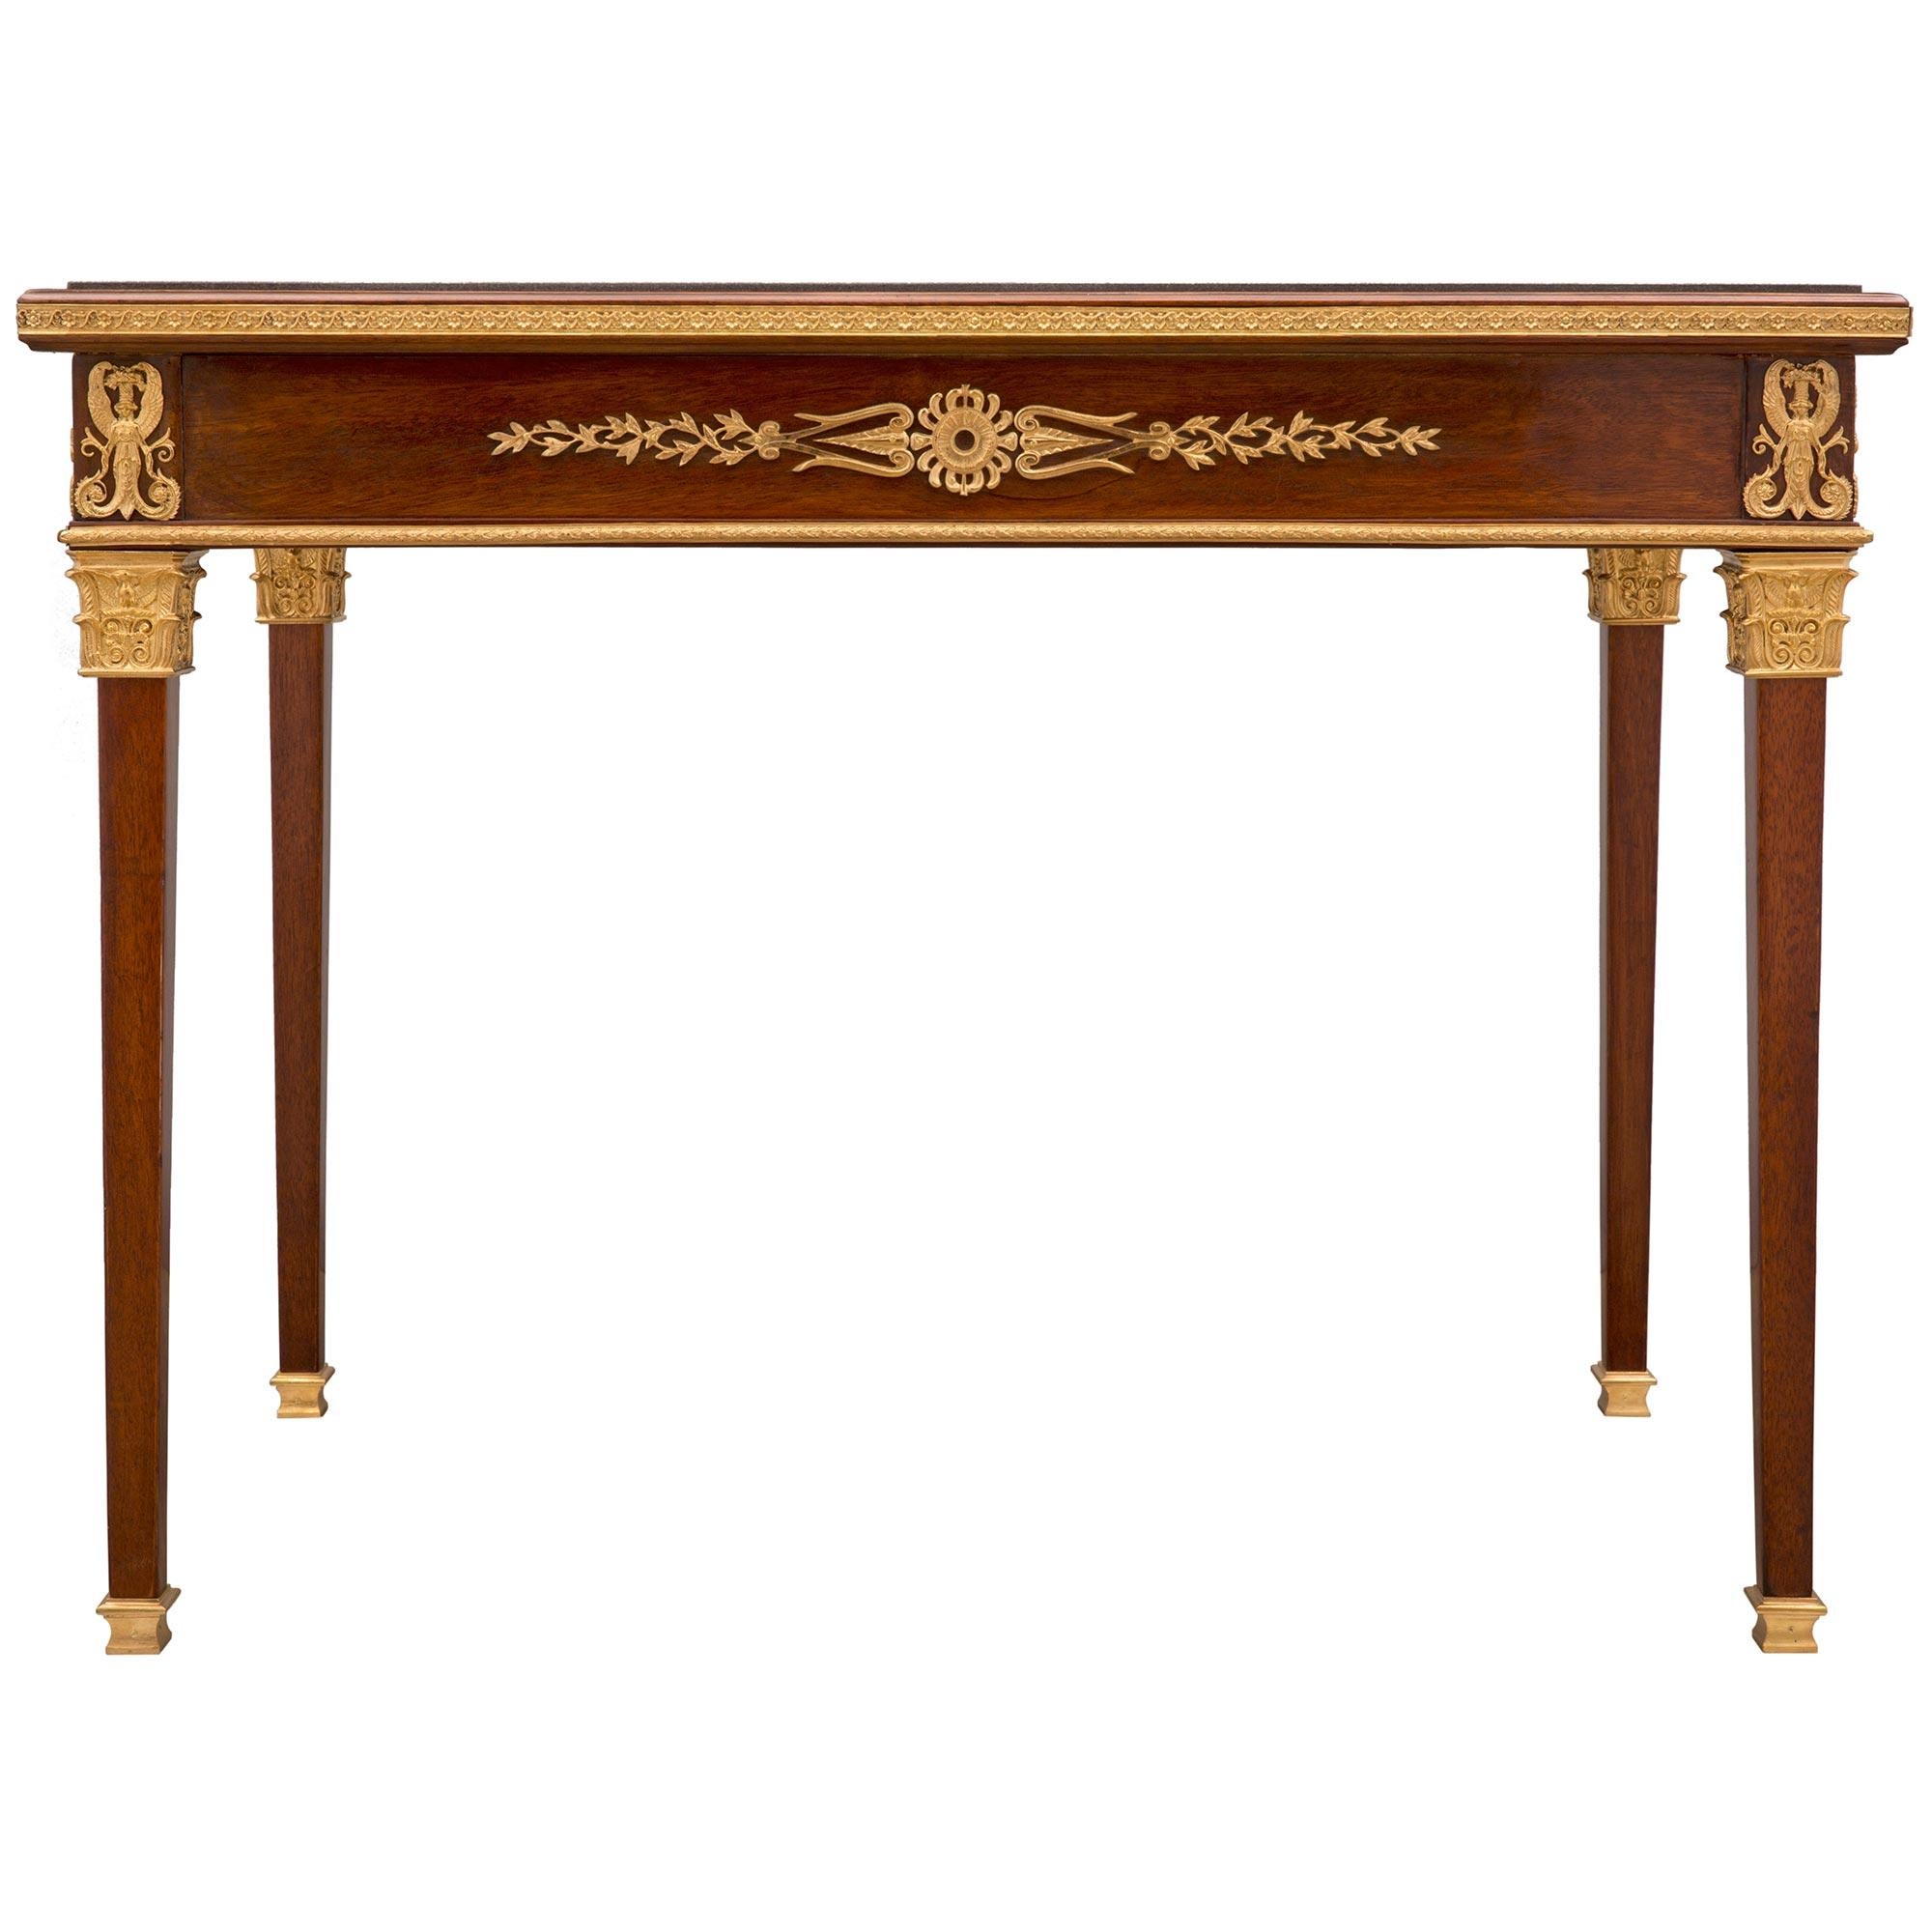 French 19th Century Neoclassical Style Mahogany, Ormolu and Slate Table/Desk For Sale 3